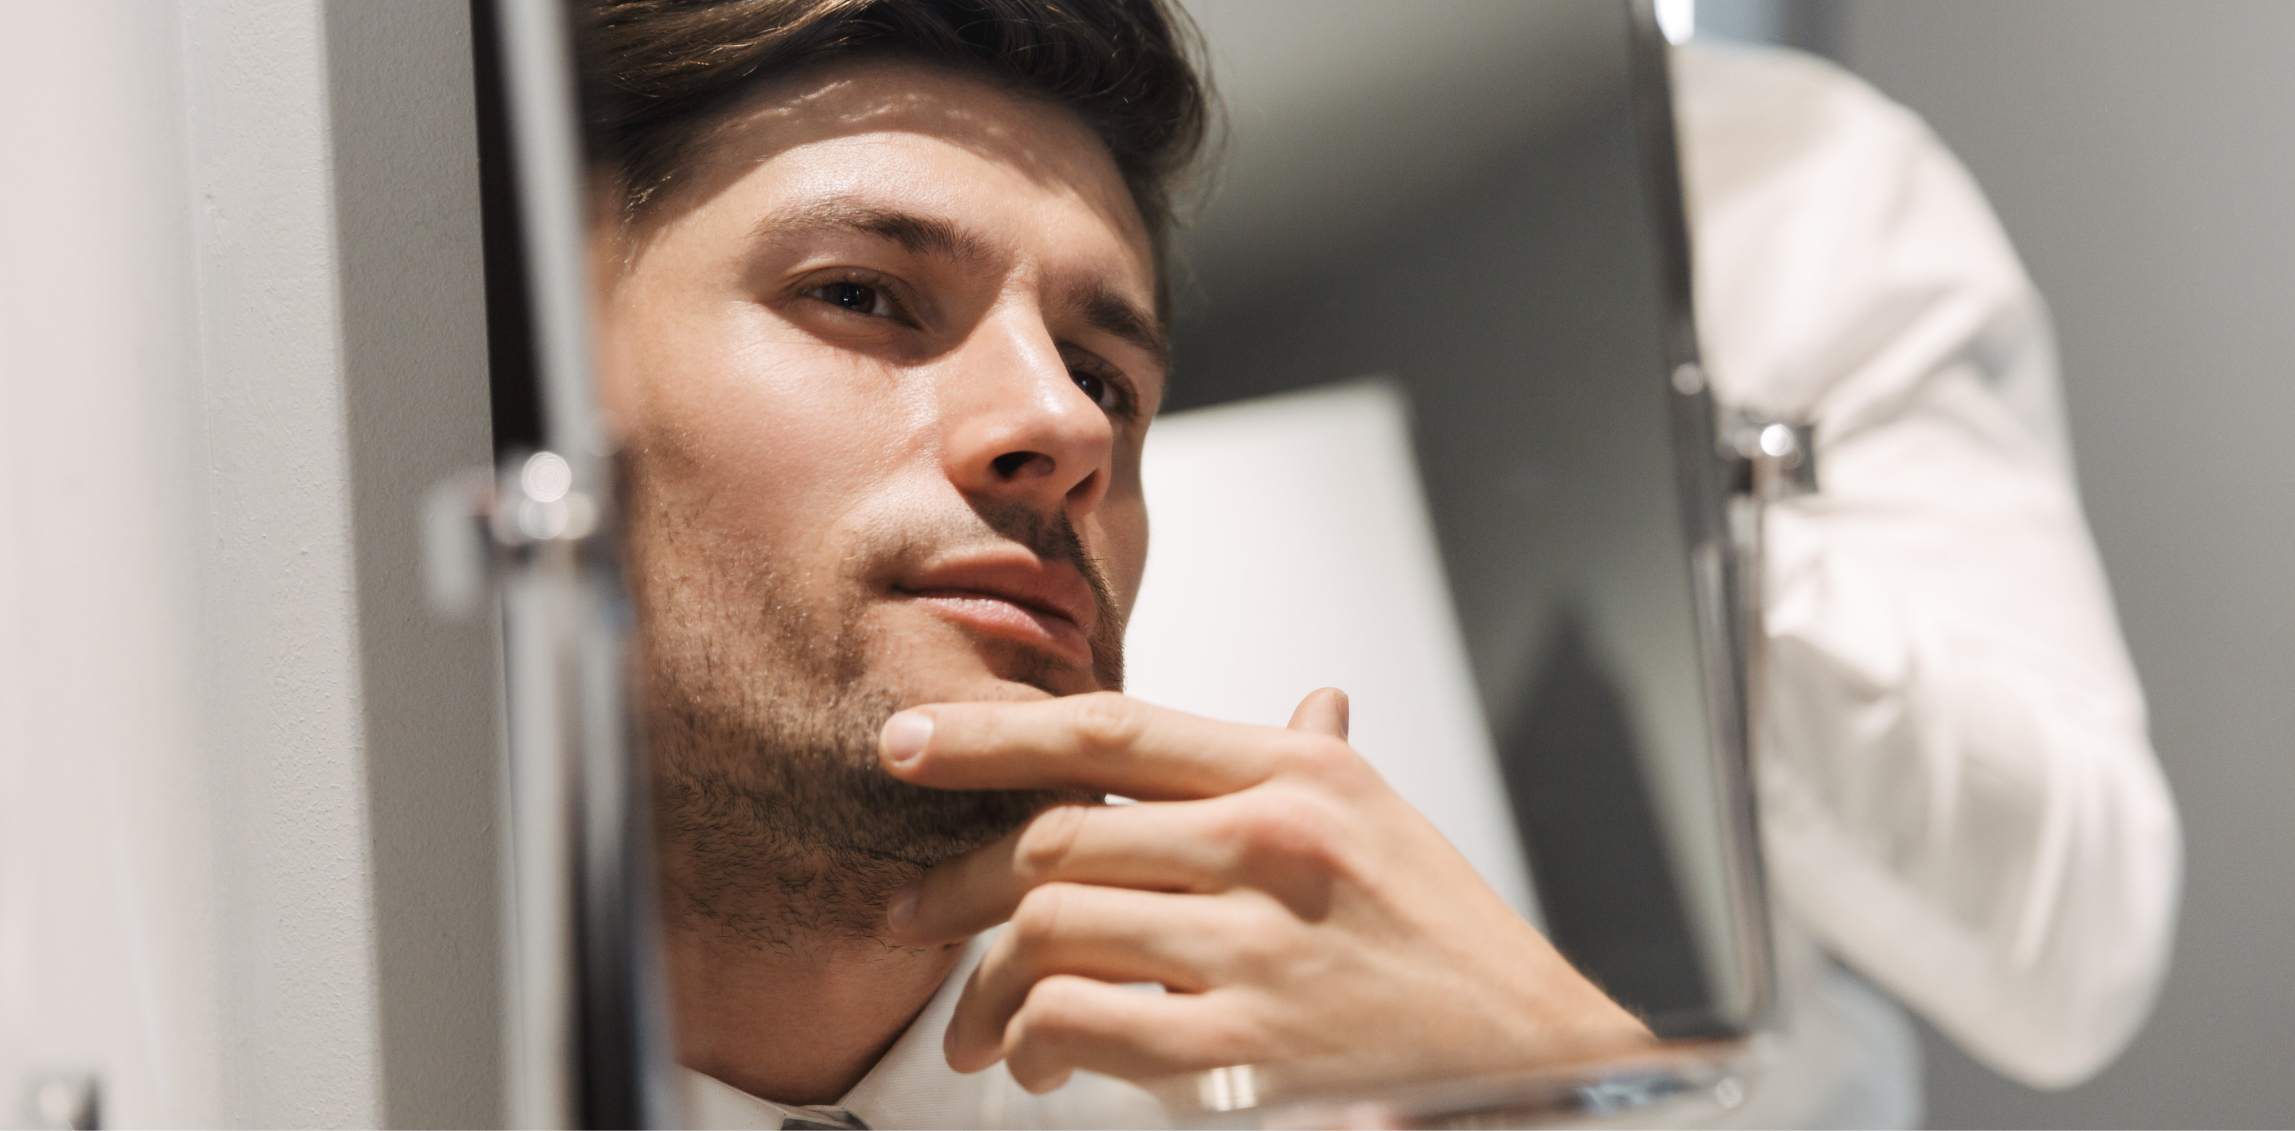 Man looking at his face in the mirror